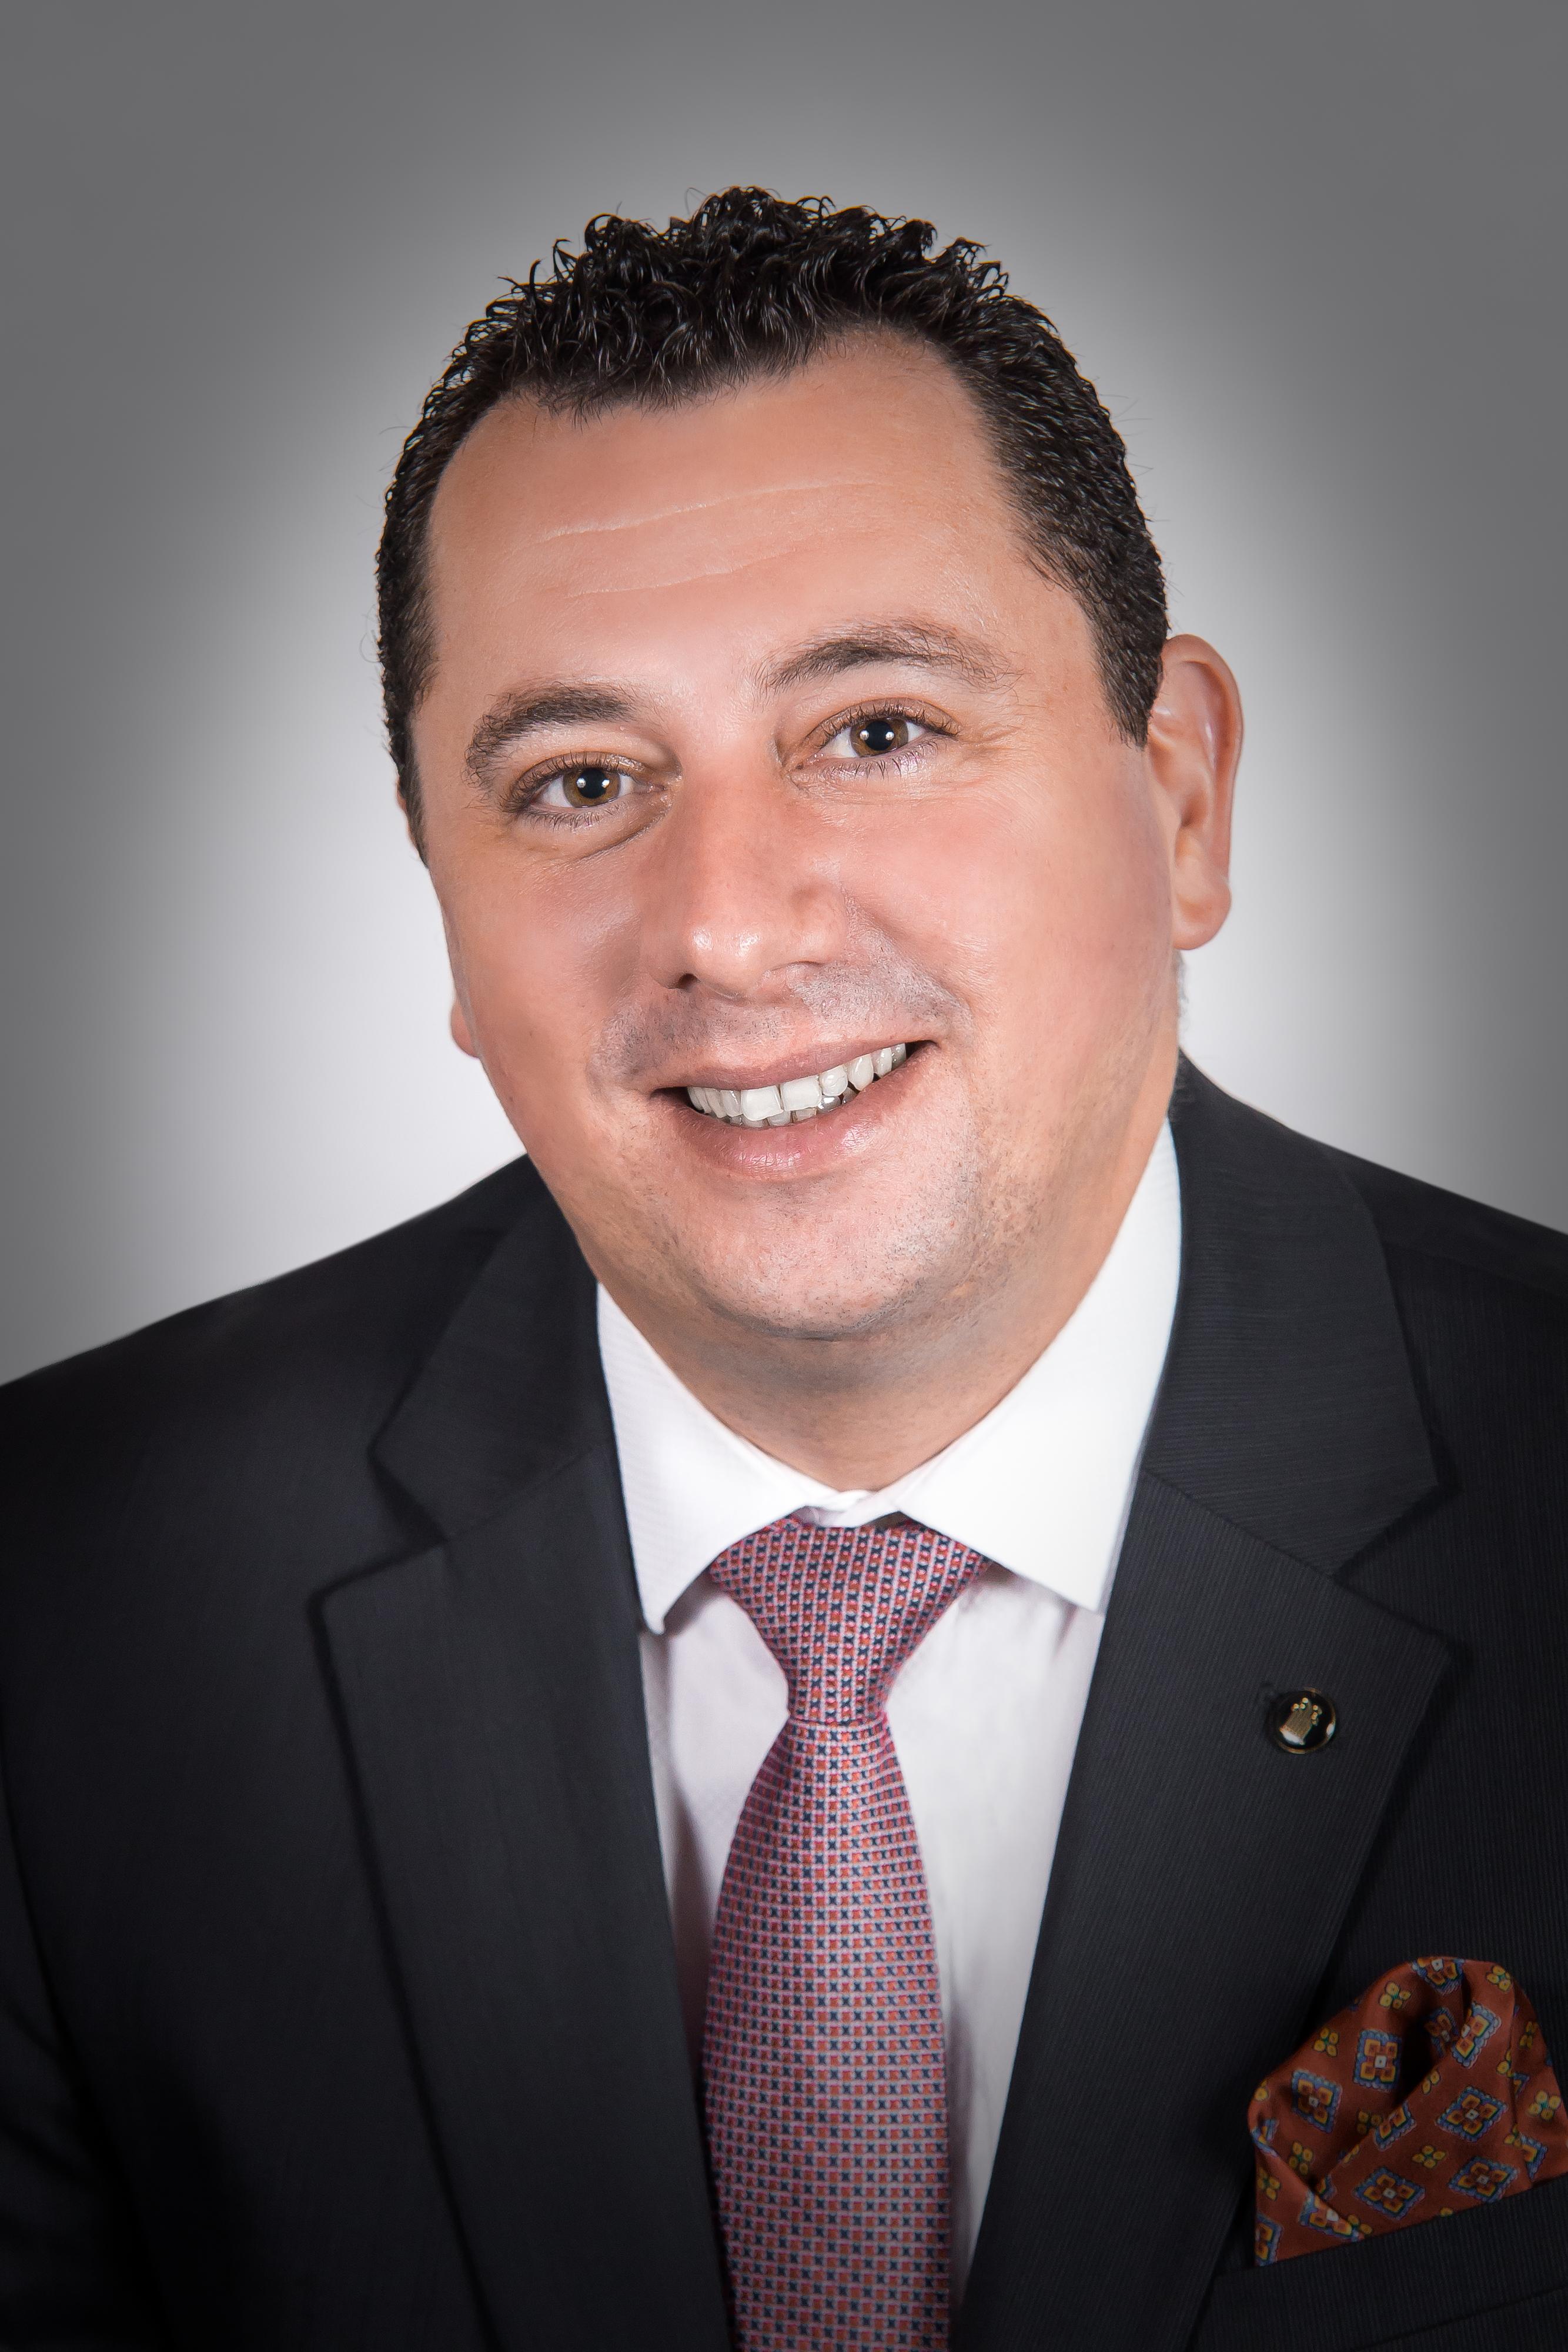 Jean Pierre Mifsud, General Manager, Corinthia Hotel Budapest